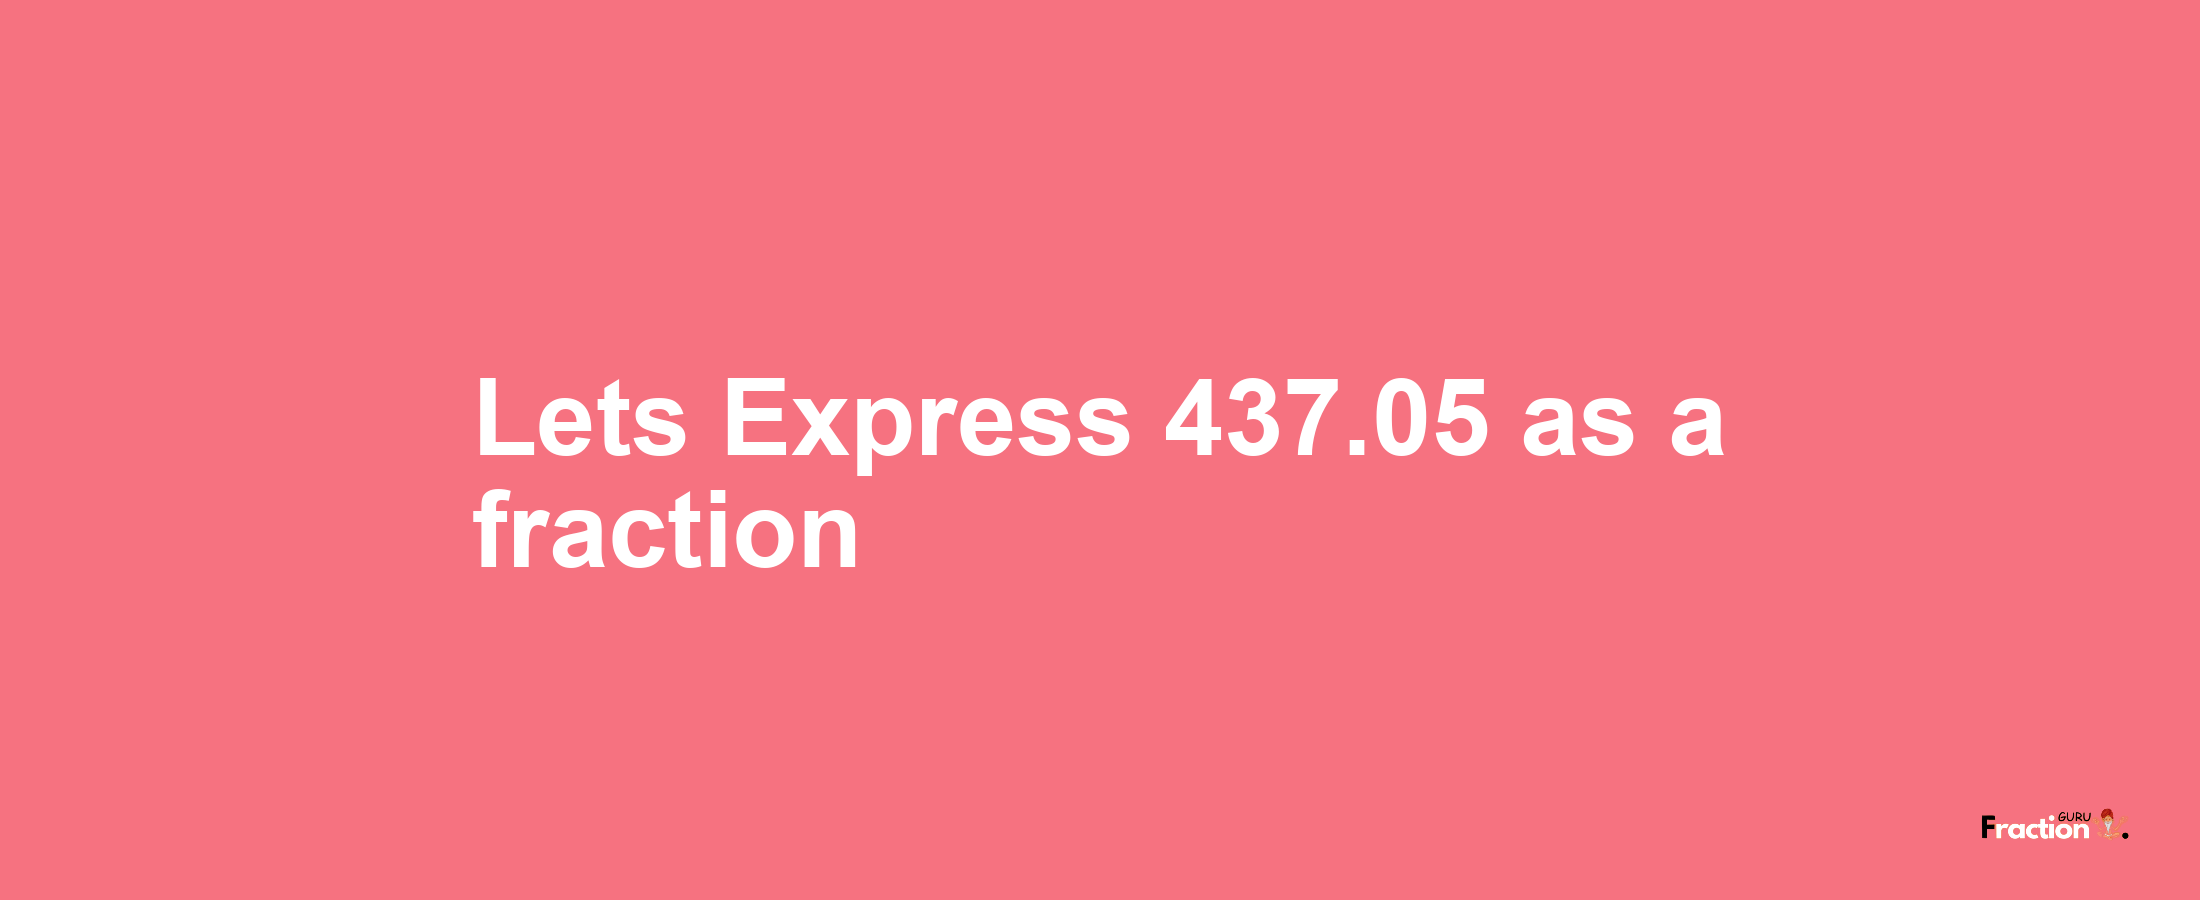 Lets Express 437.05 as afraction